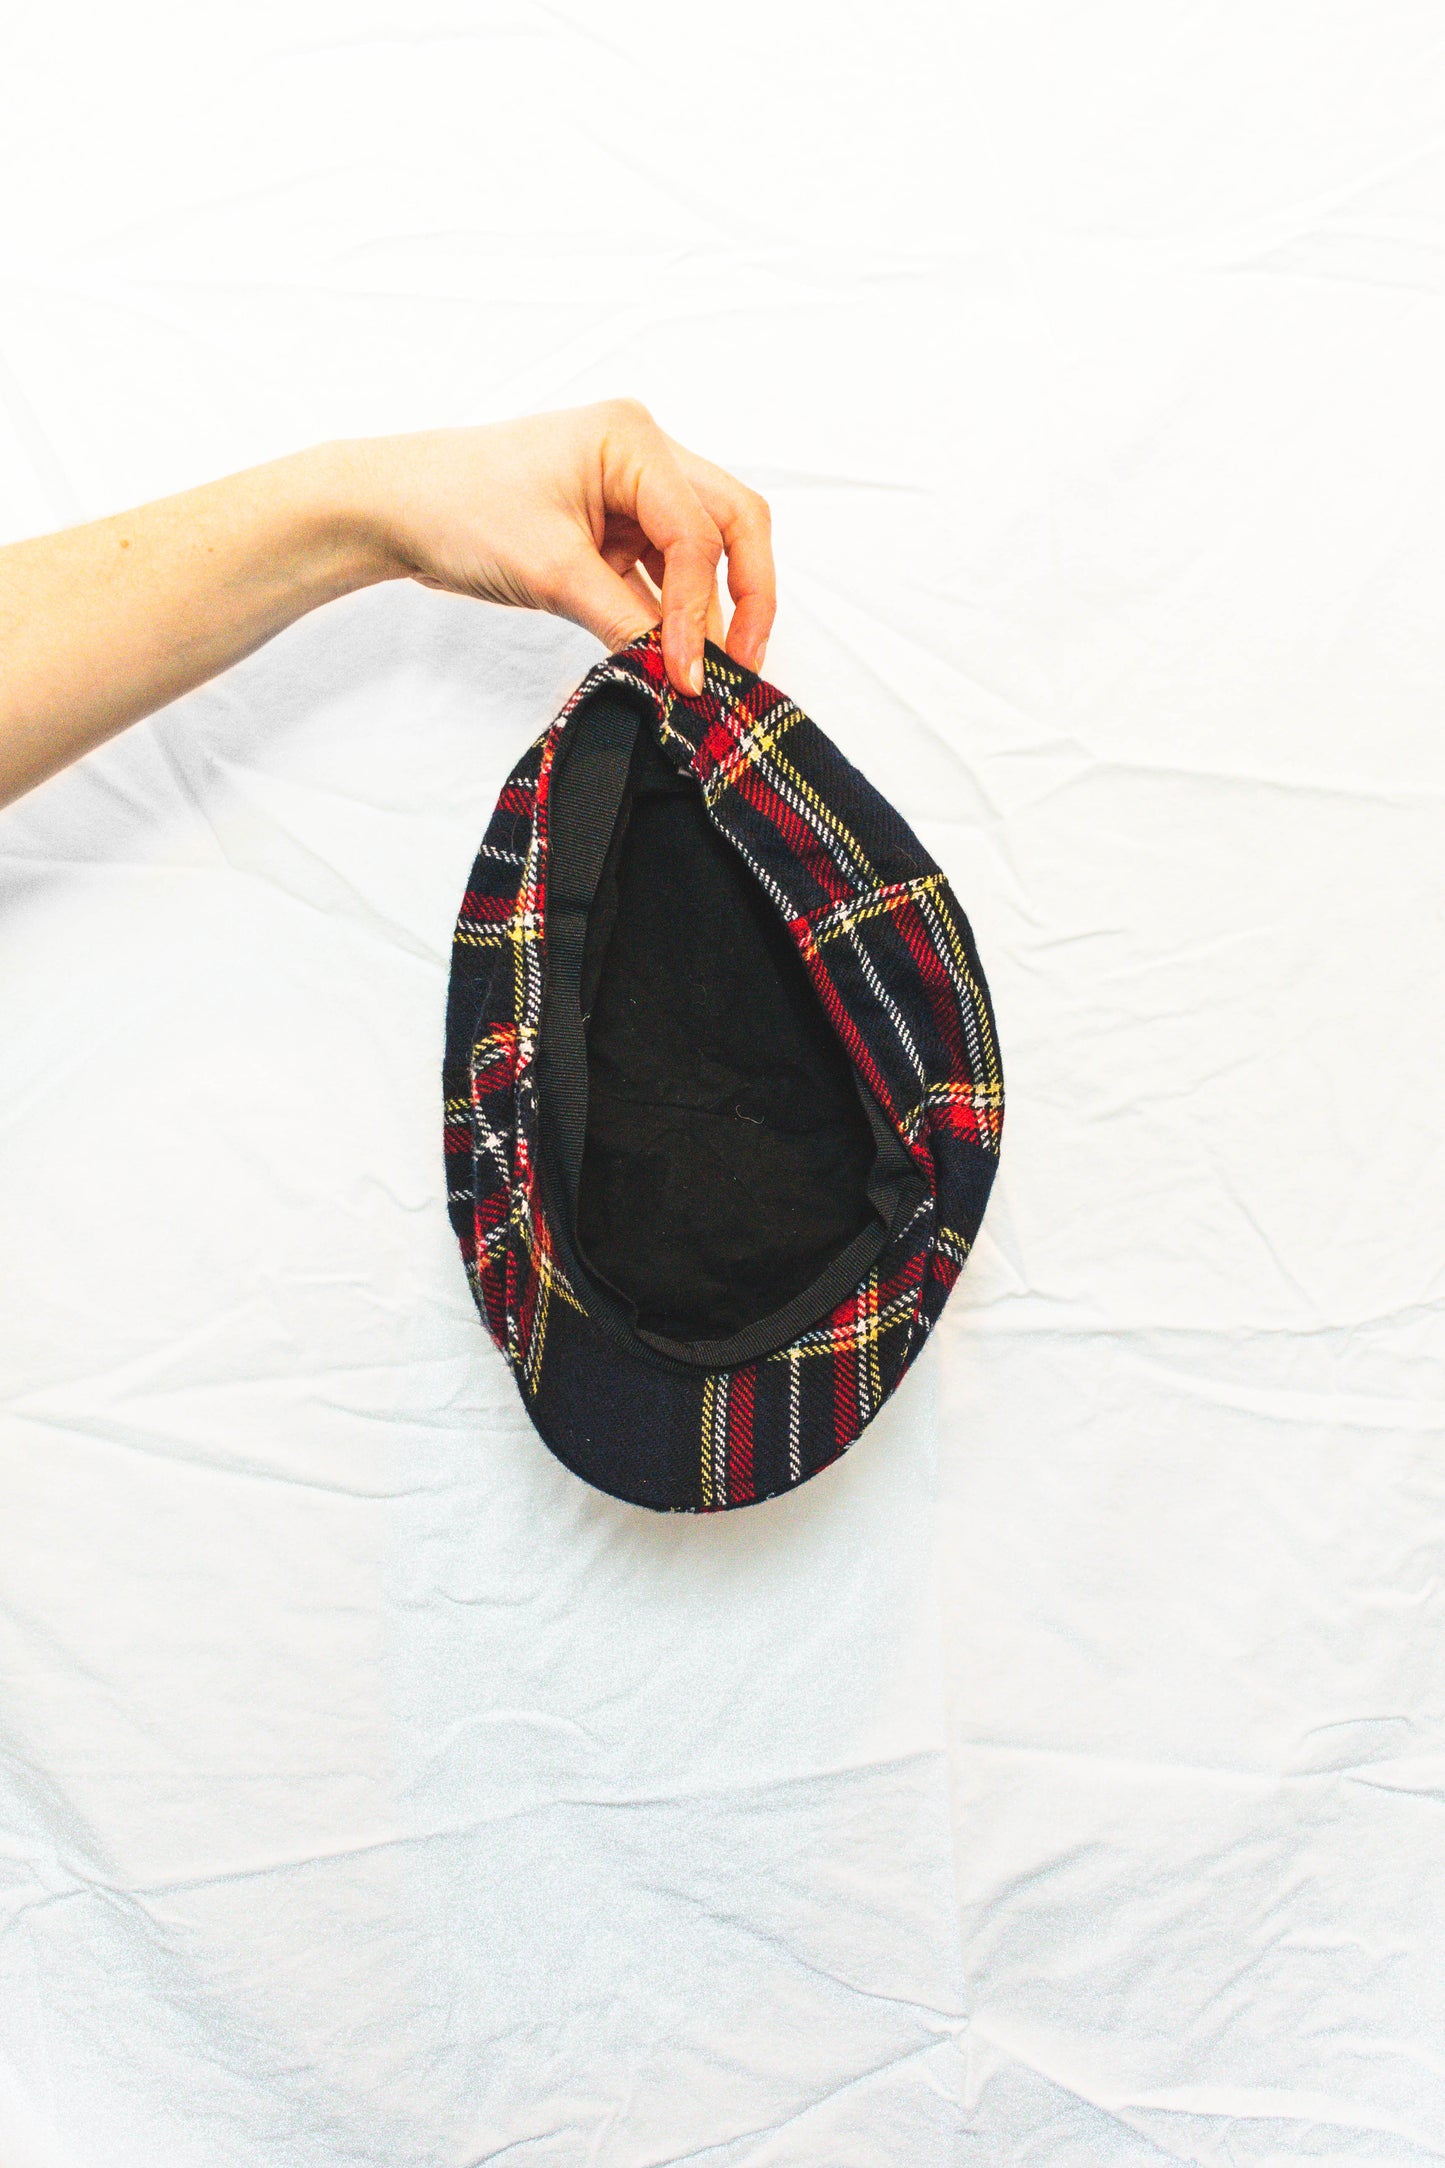 NEW IN! Checkered cap